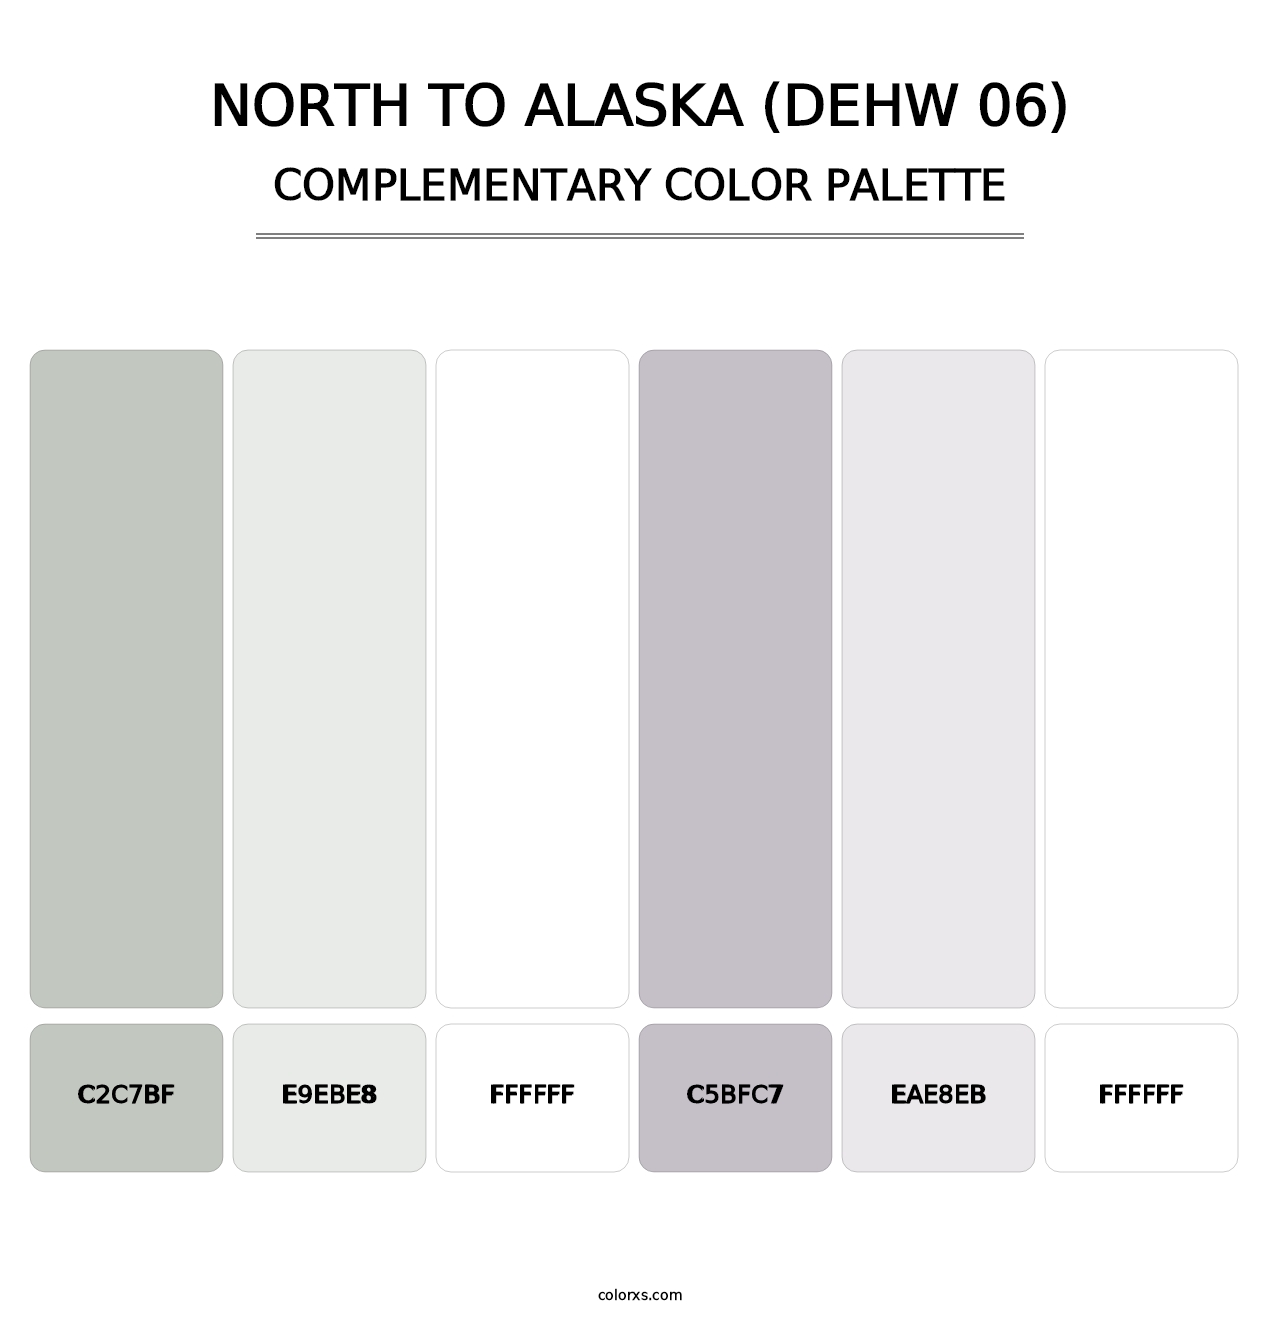 North To Alaska (DEHW 06) - Complementary Color Palette